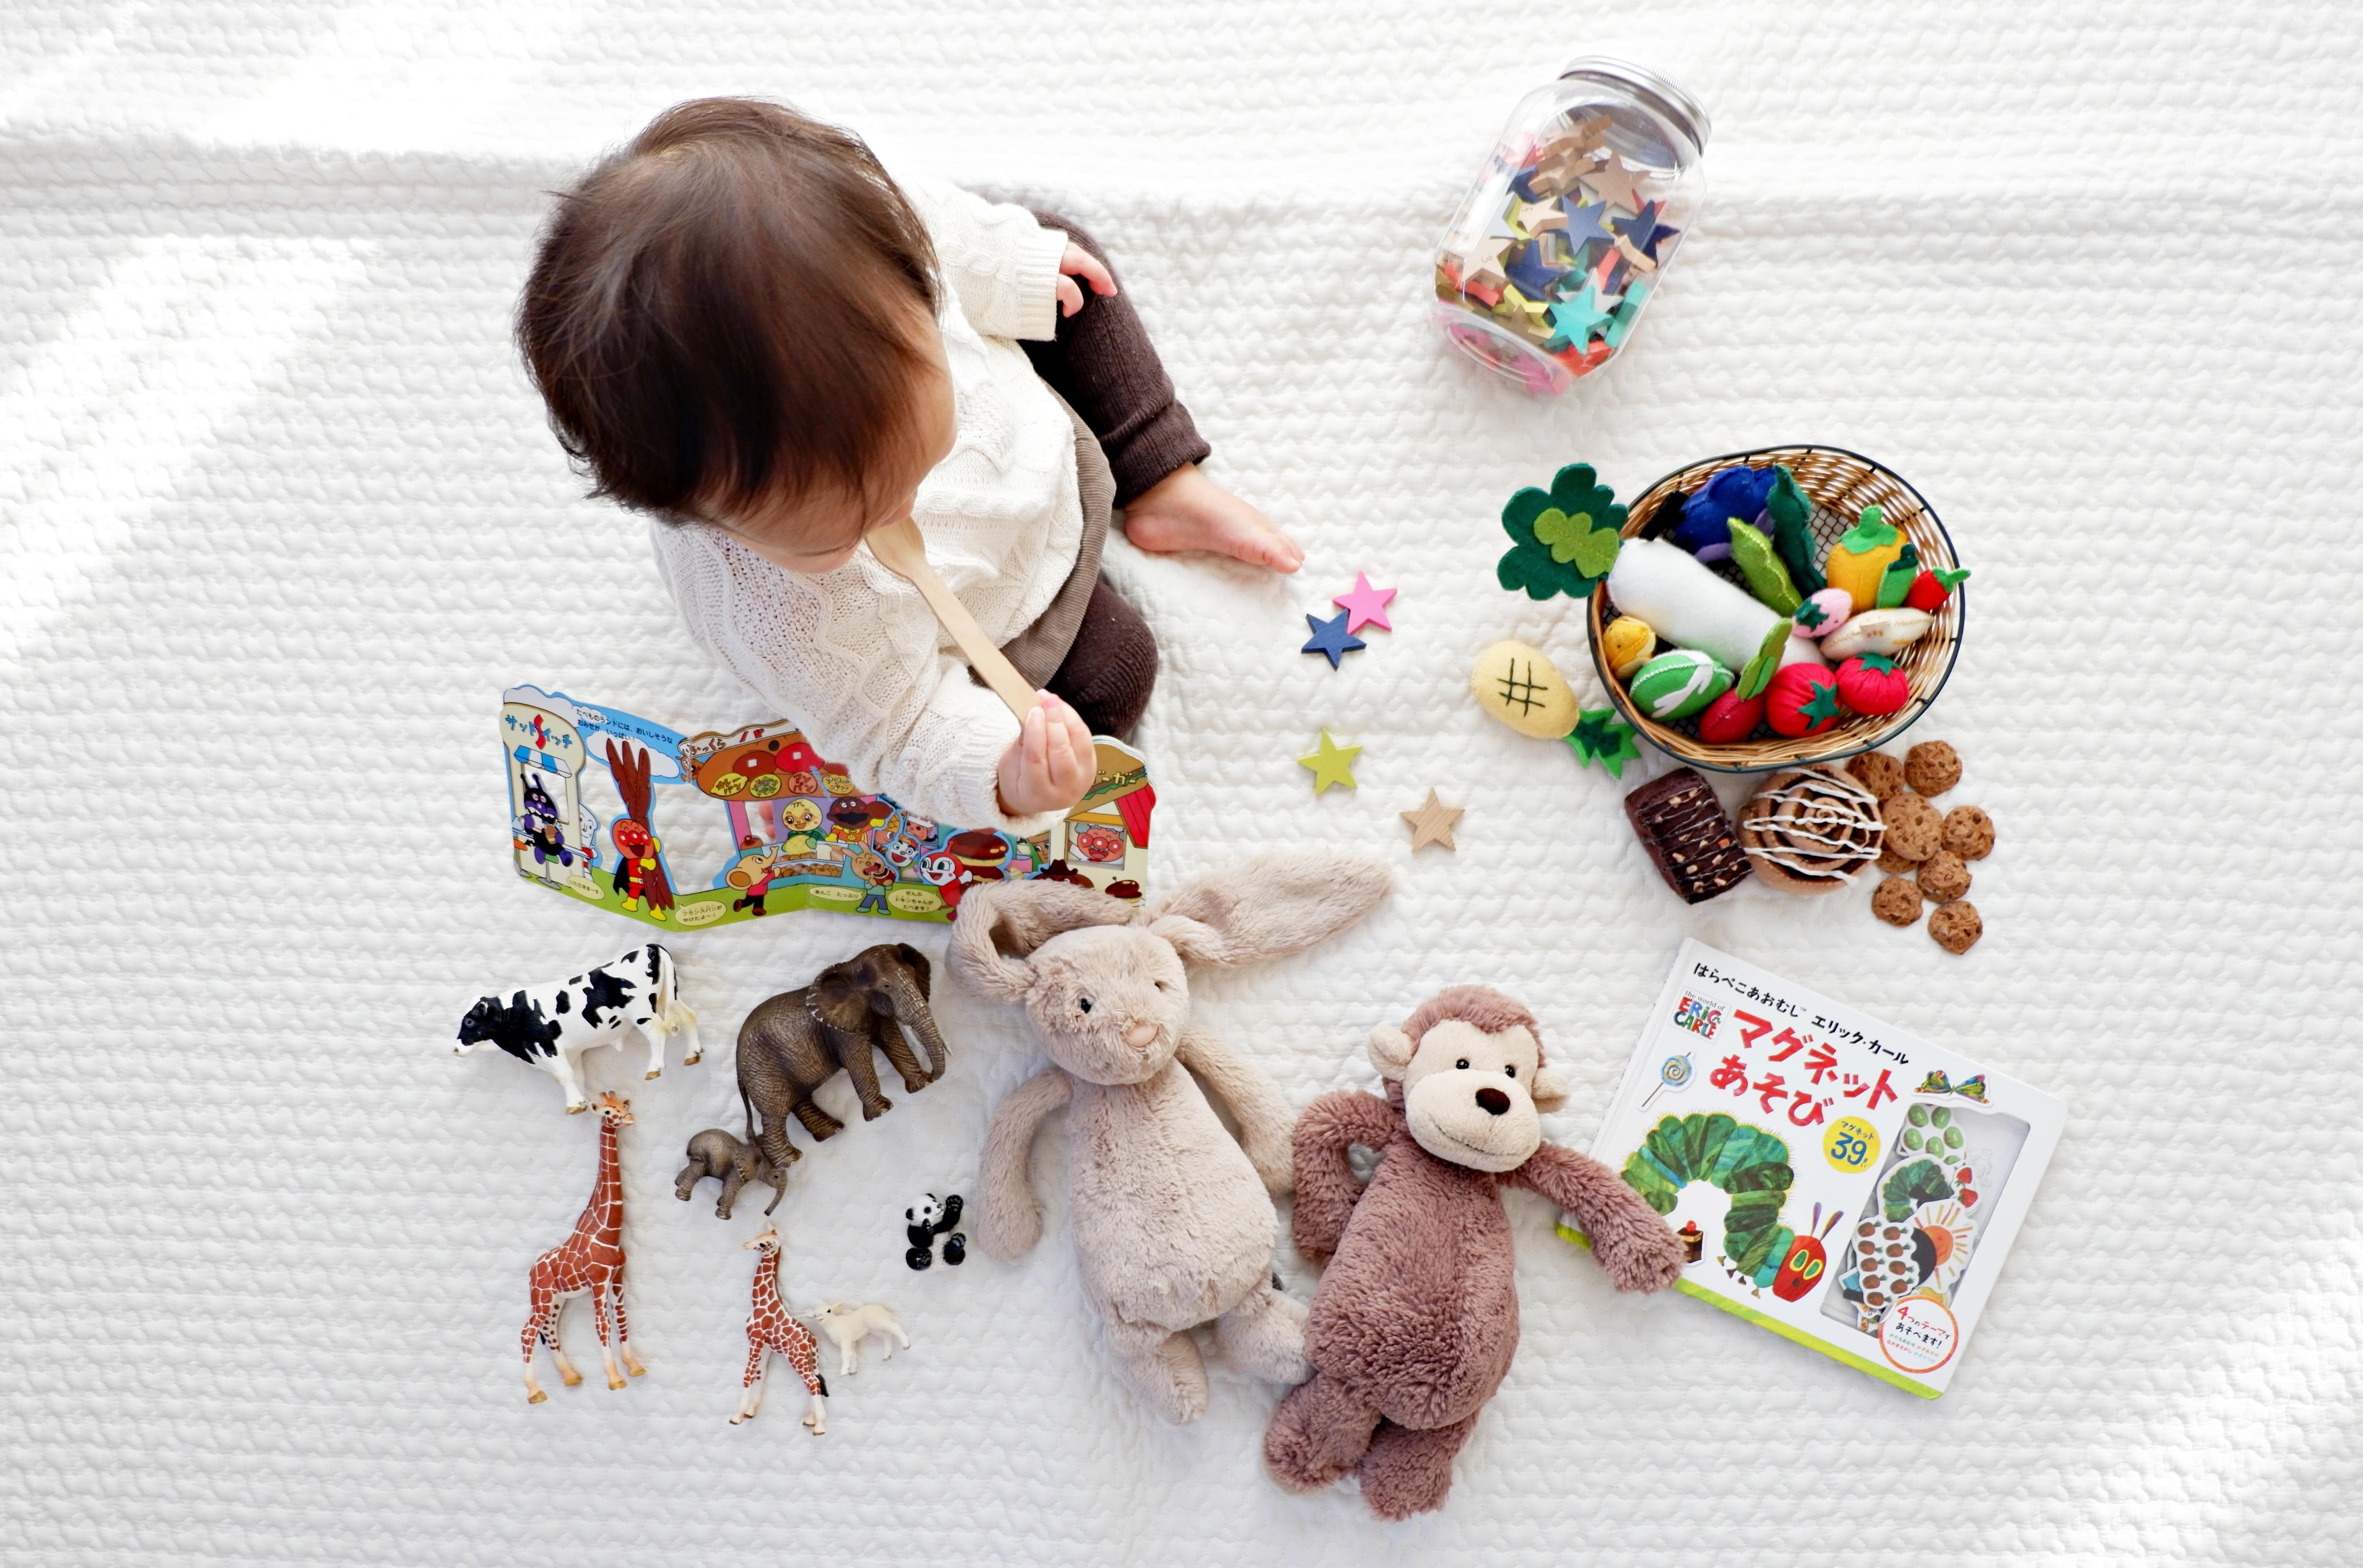 Stock image - Baby girl child playing wit toys in the home - Shitota Yuri